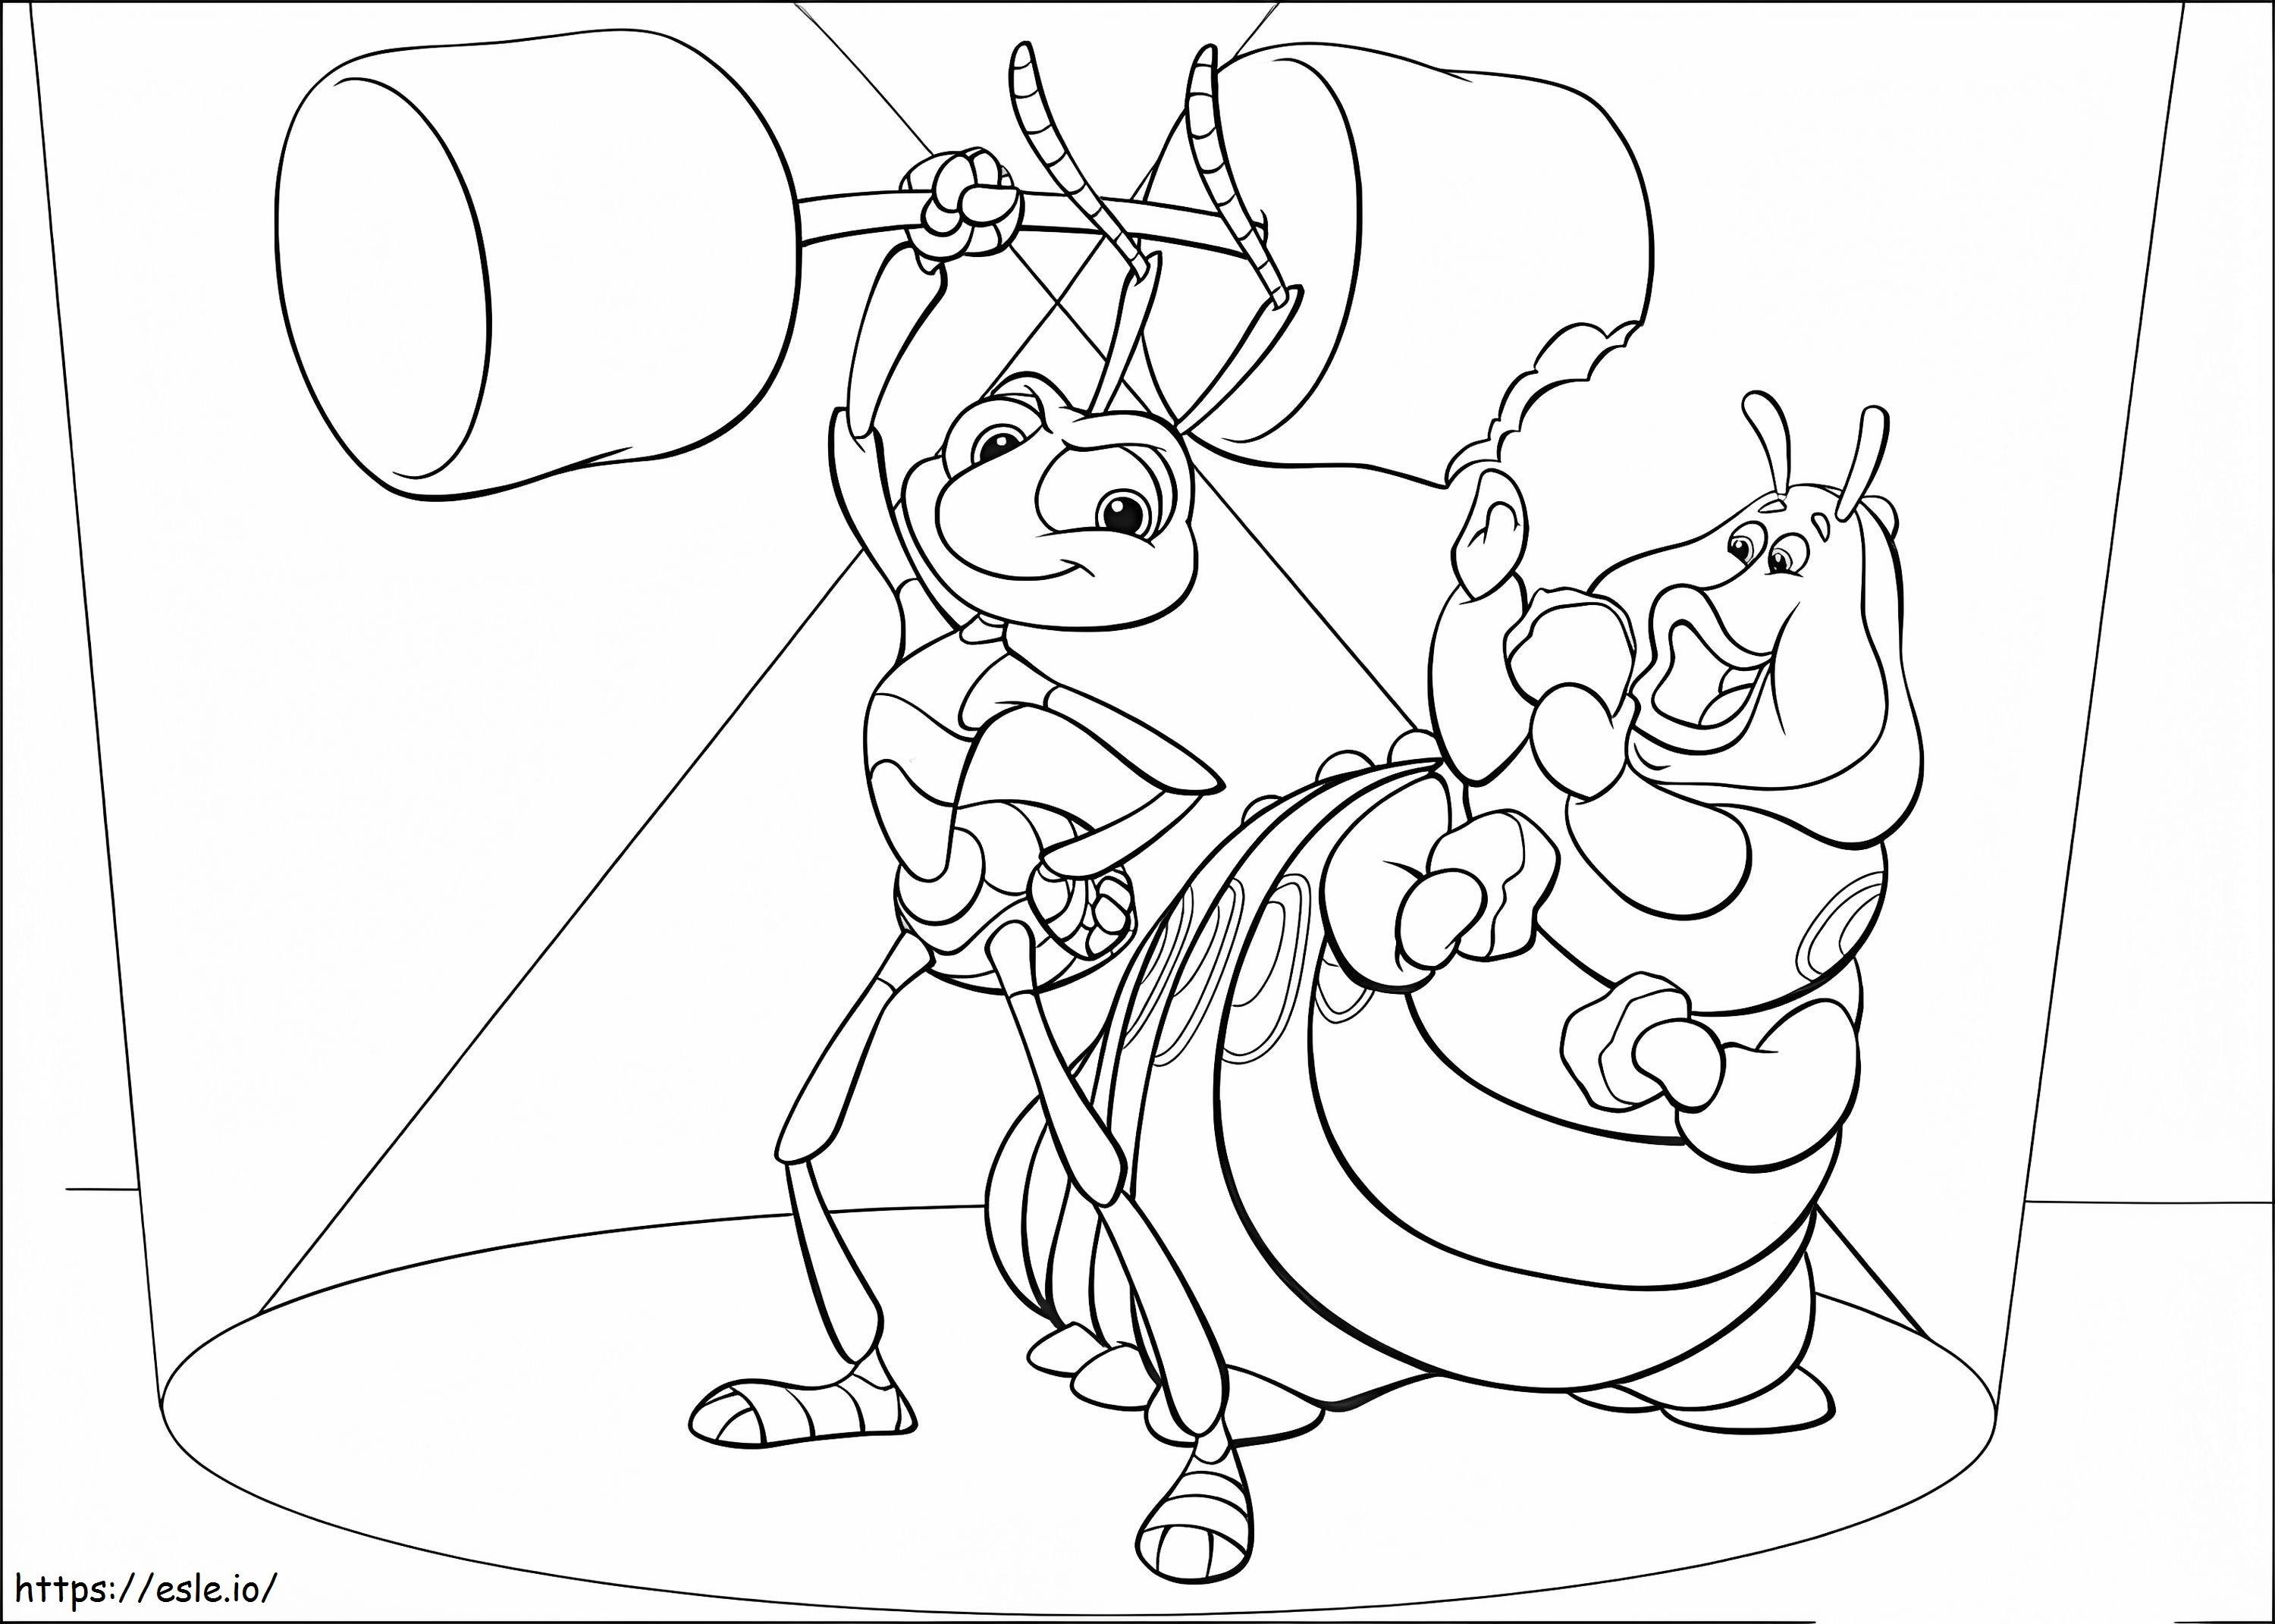 1599611283 Bugs And Marsmallow coloring page